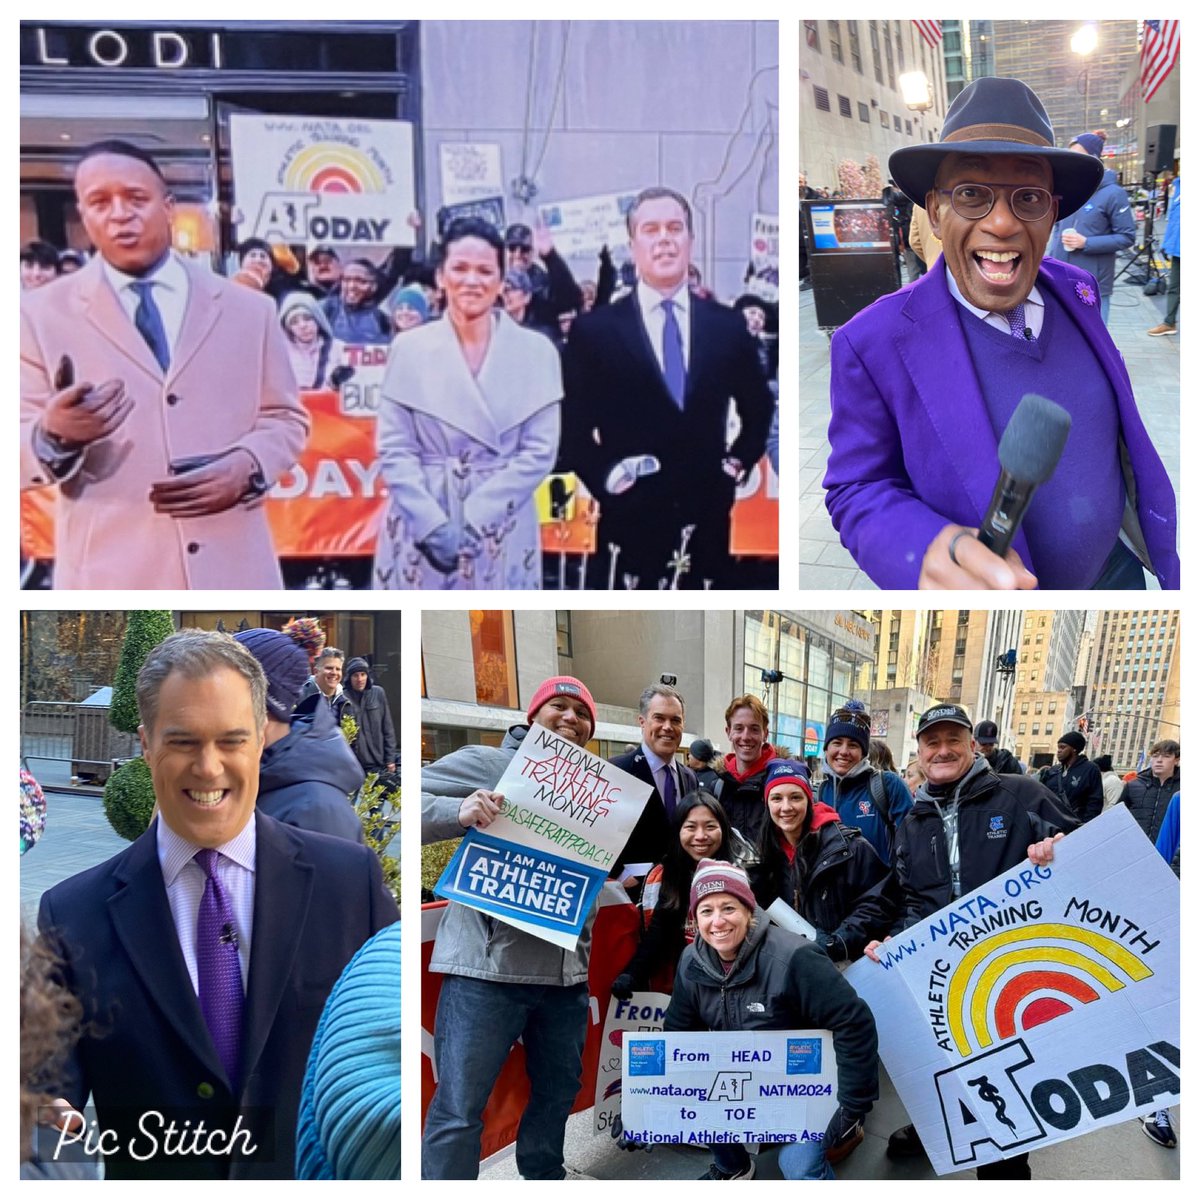 Give me an opening, and my sign will find it and stake a claim. That’s the name of the game when promoting National Athletic Training Month to more than 5 million viewers daily on The TODAY Show. @NATA1950 @natad2 @EATA49 @NJSportSafety @K_S_Institute